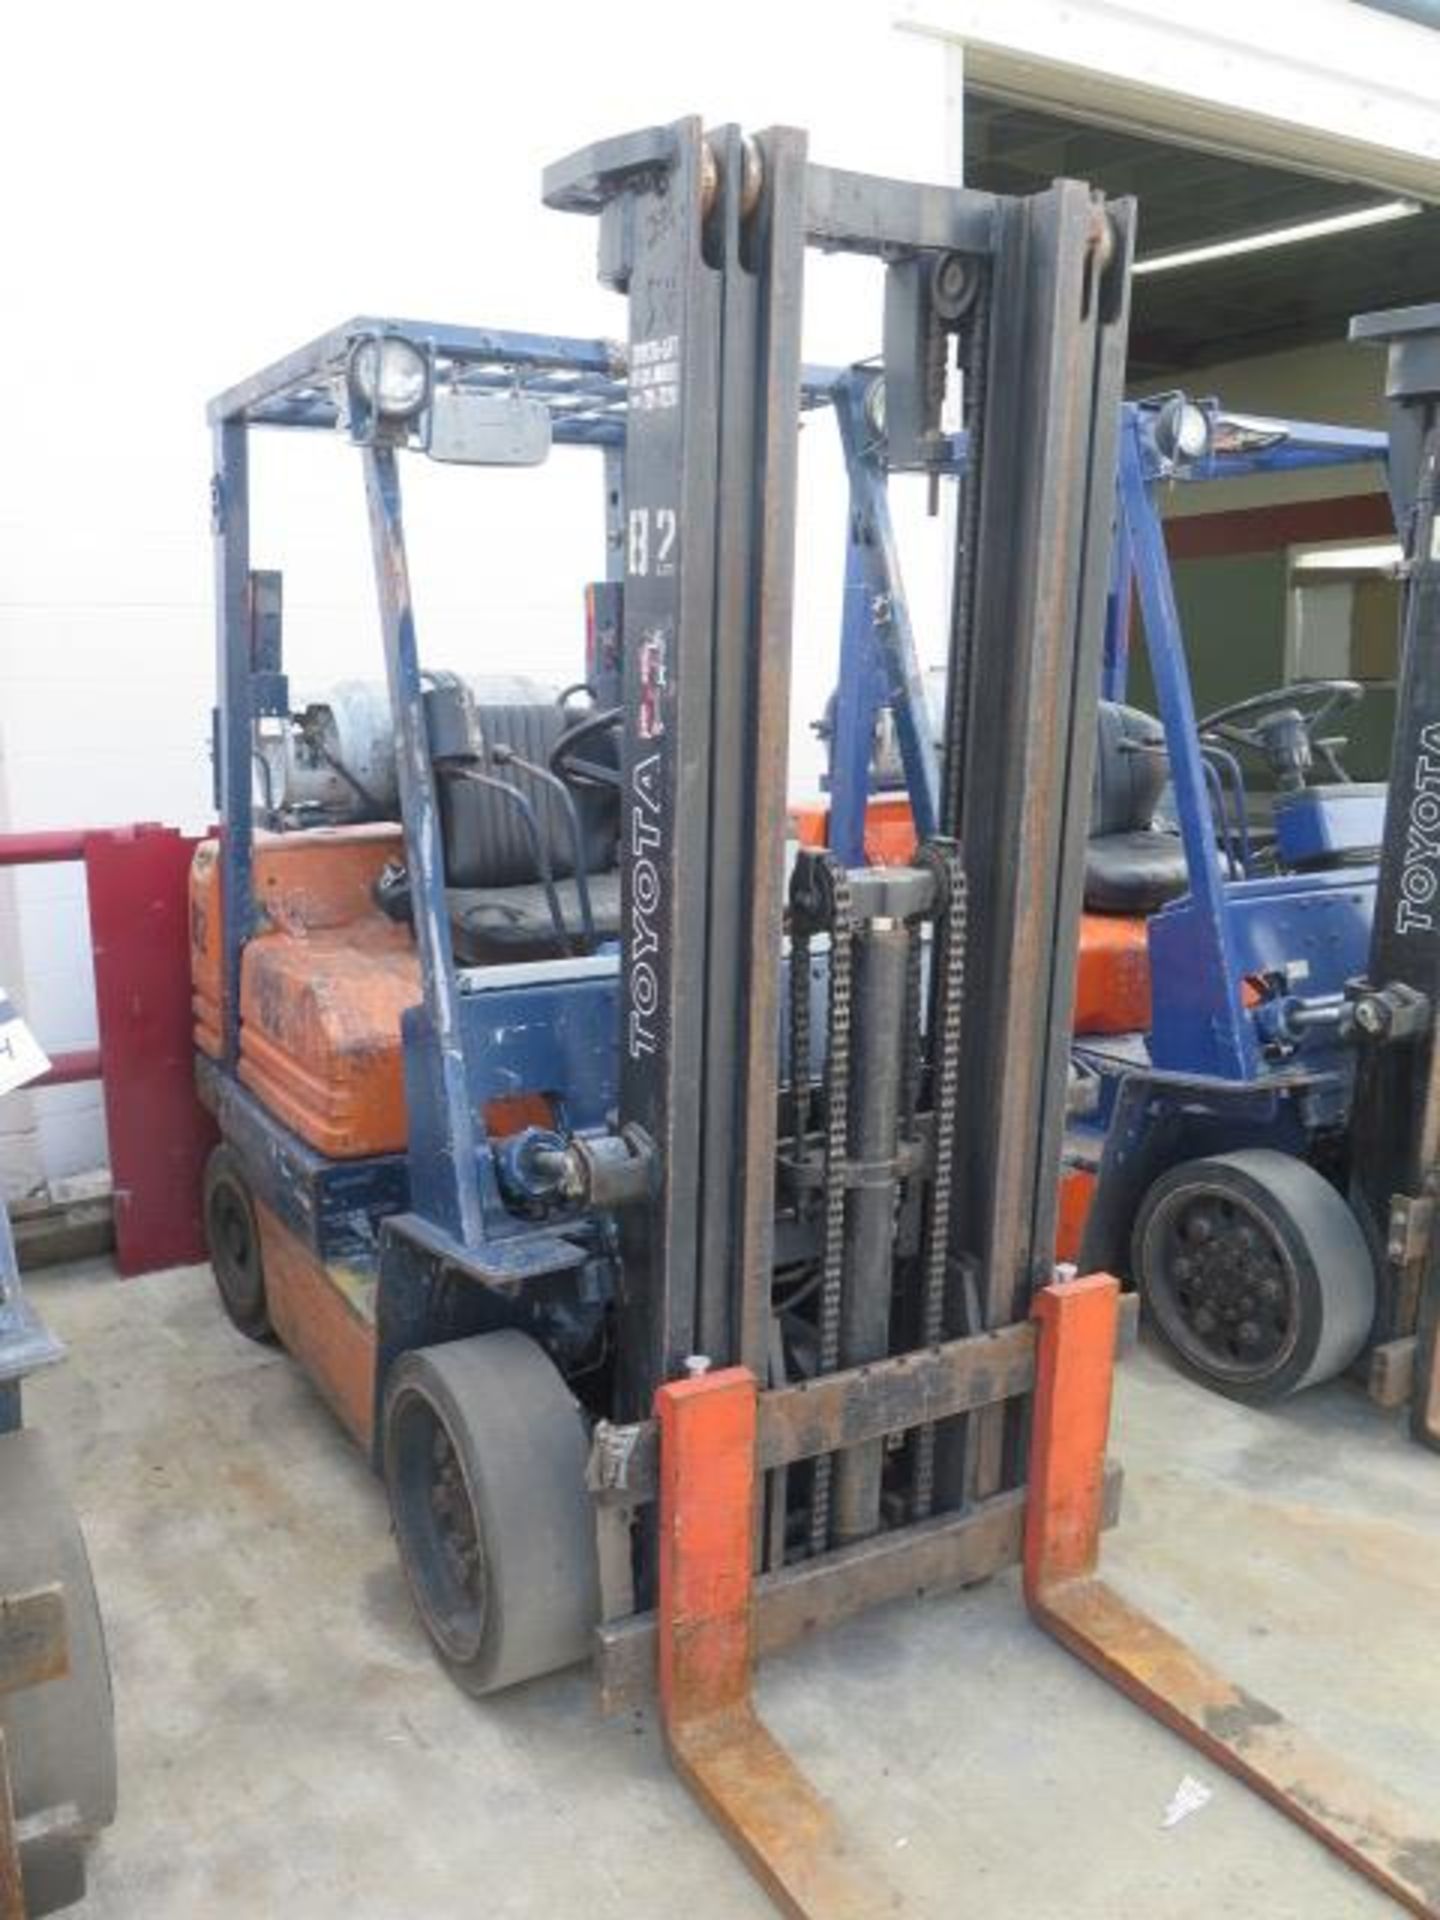 Toyota 5FGC25 5000 Lb Cap LPG Forklift s/n 84733 w/ 3-Stage Mast, 197" Lift Height, Cushion Tires, - Image 2 of 11